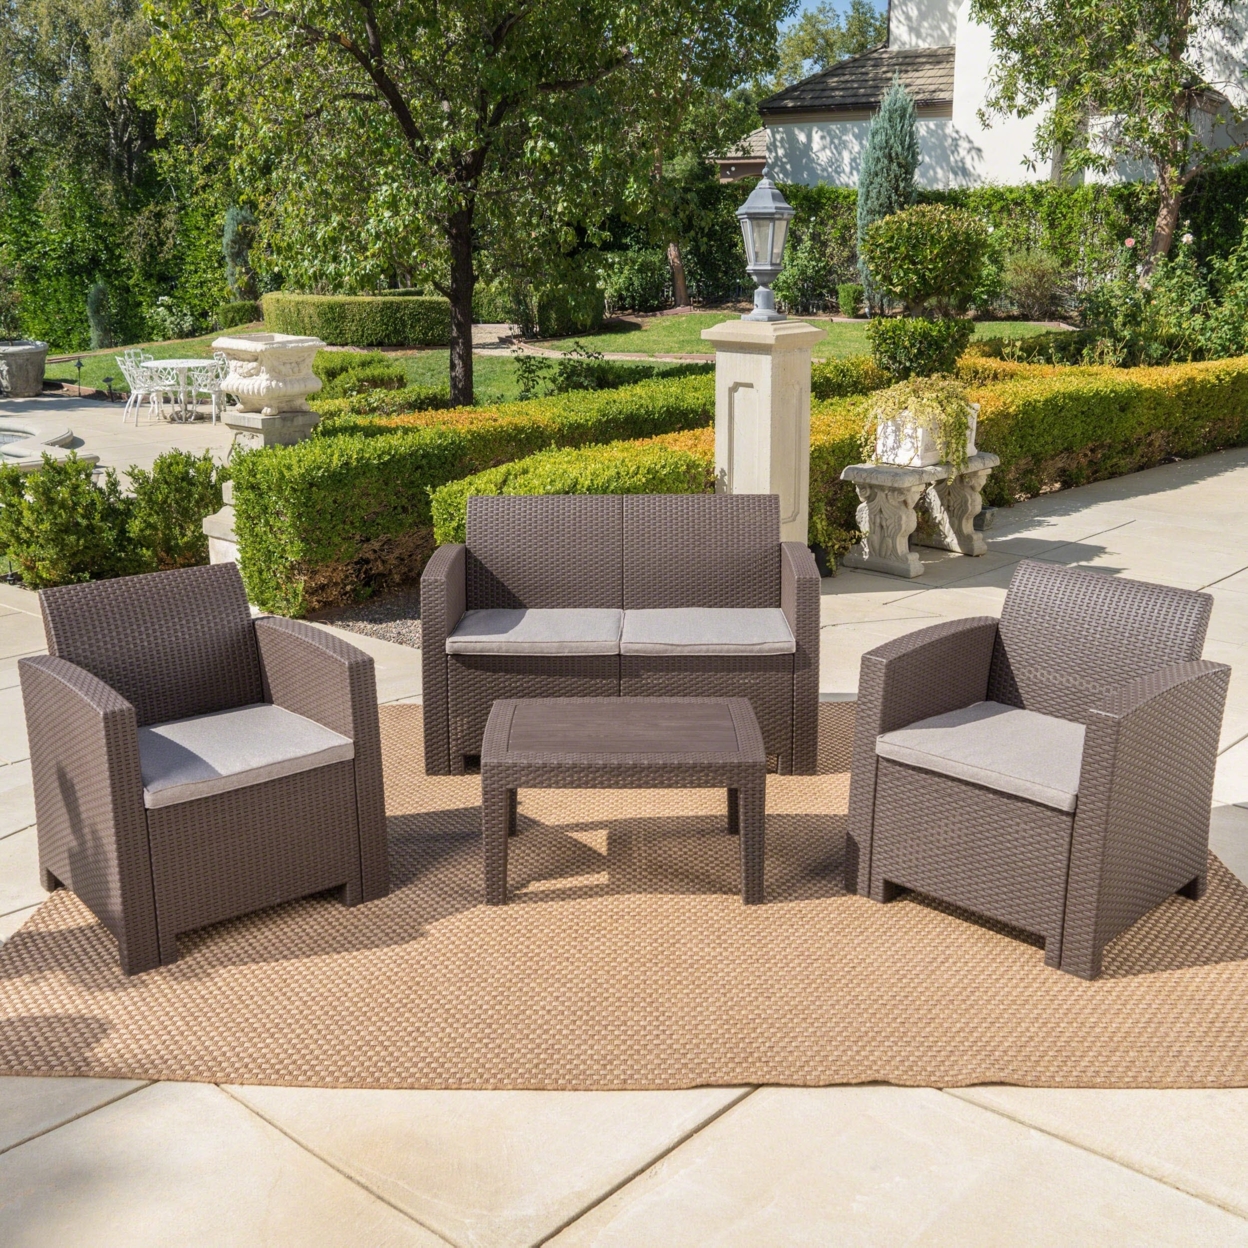 Dayton Outdoor 4 Piece Faux Wicker Rattan Chat Set With Water Resistant Cushions - Brown/Mix Beige